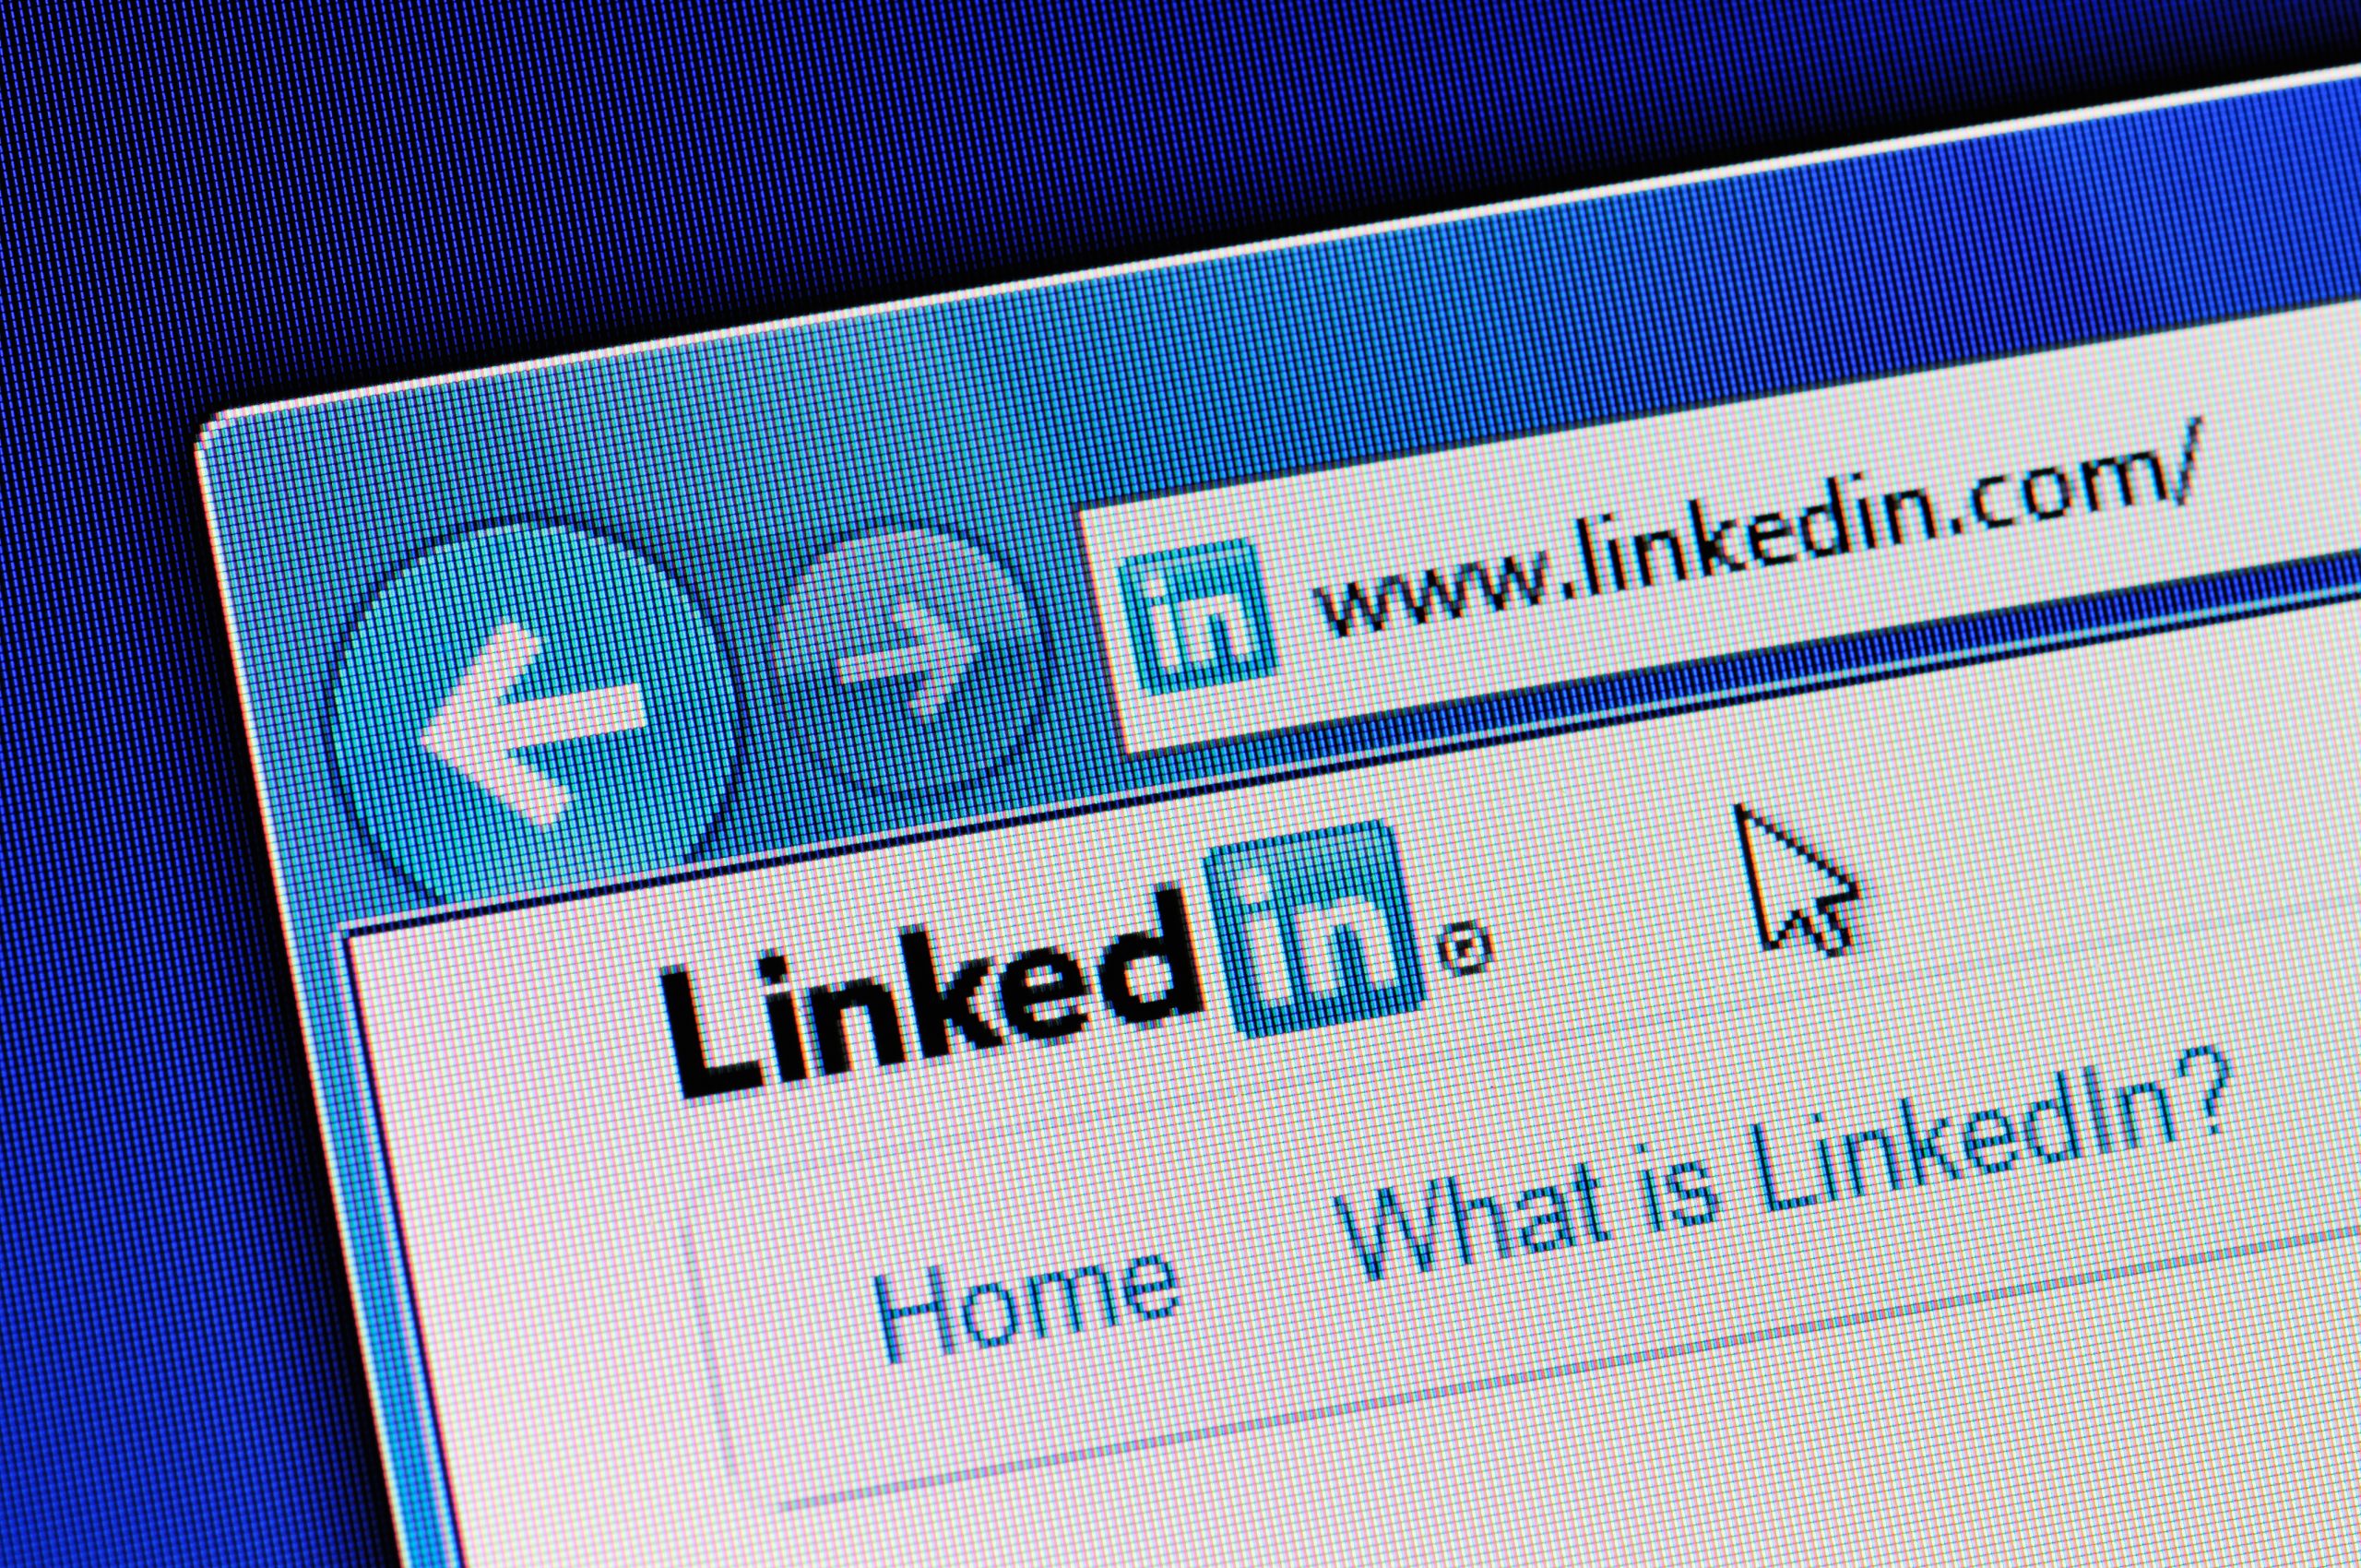 Using Your Personal LinkedIn Profile to Grow Your Business